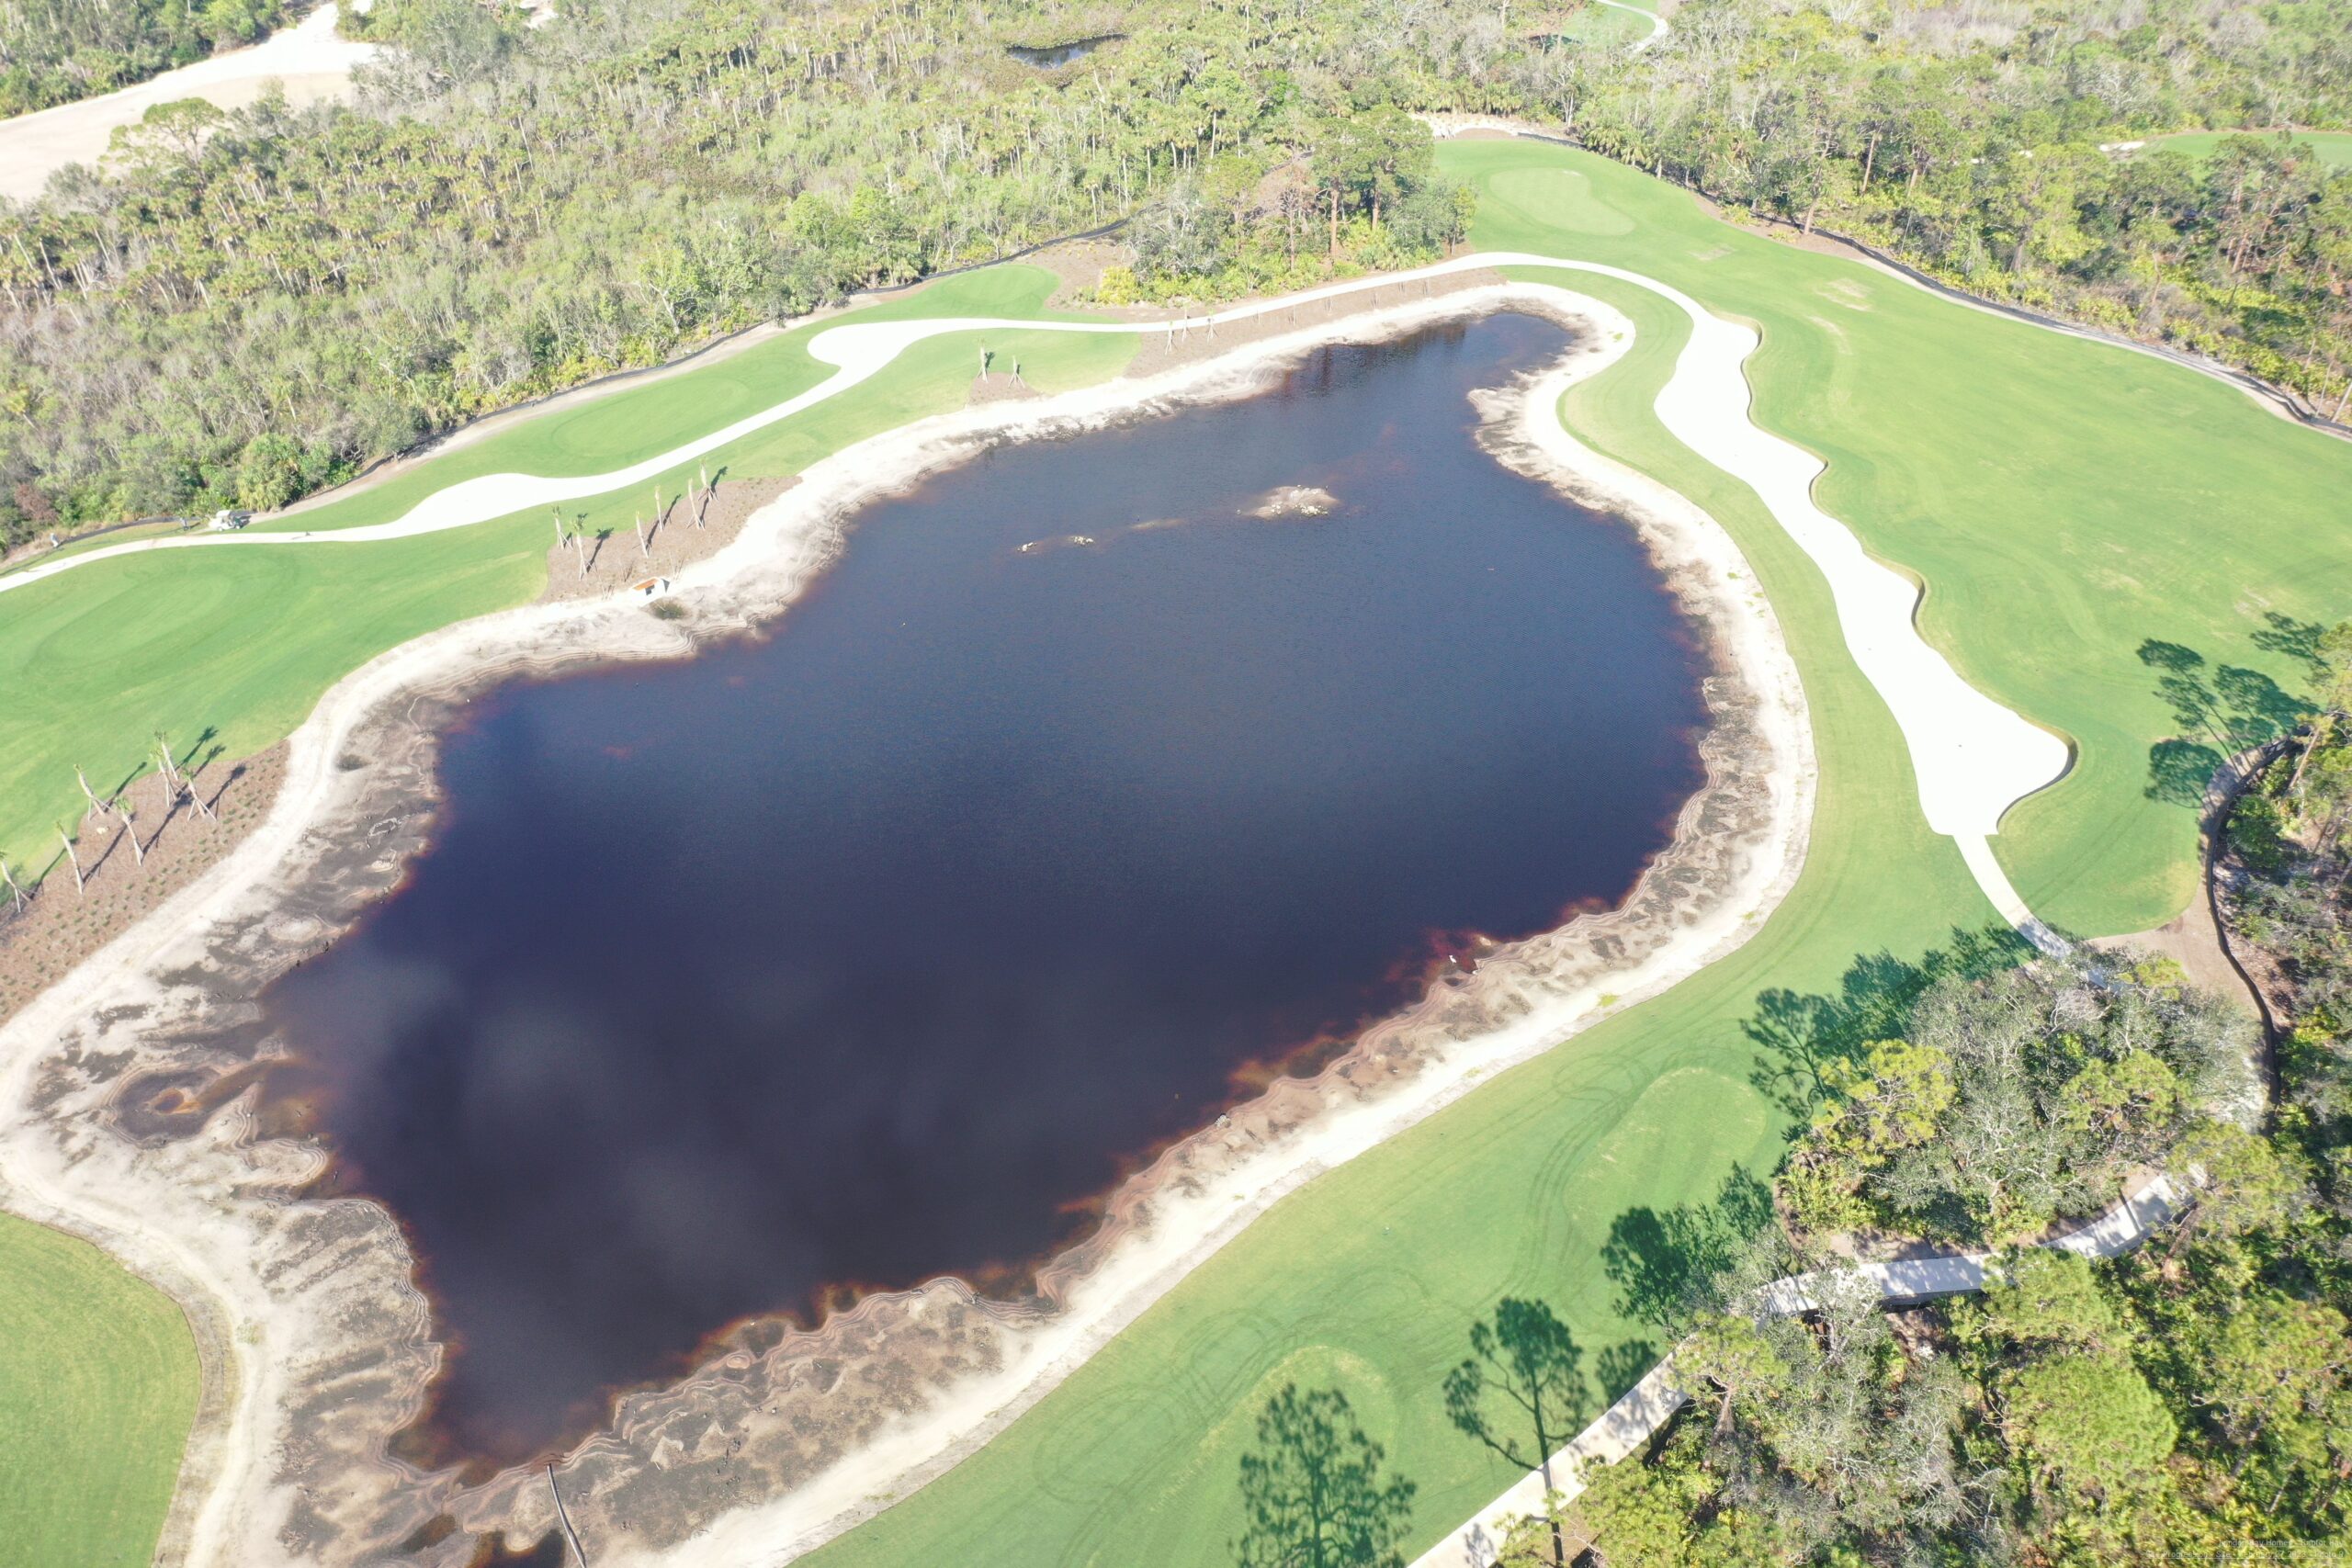 An aerial view of the Saltleaf Golf Preserve, a championship golf course in Bonita Springs, featuring a pond.